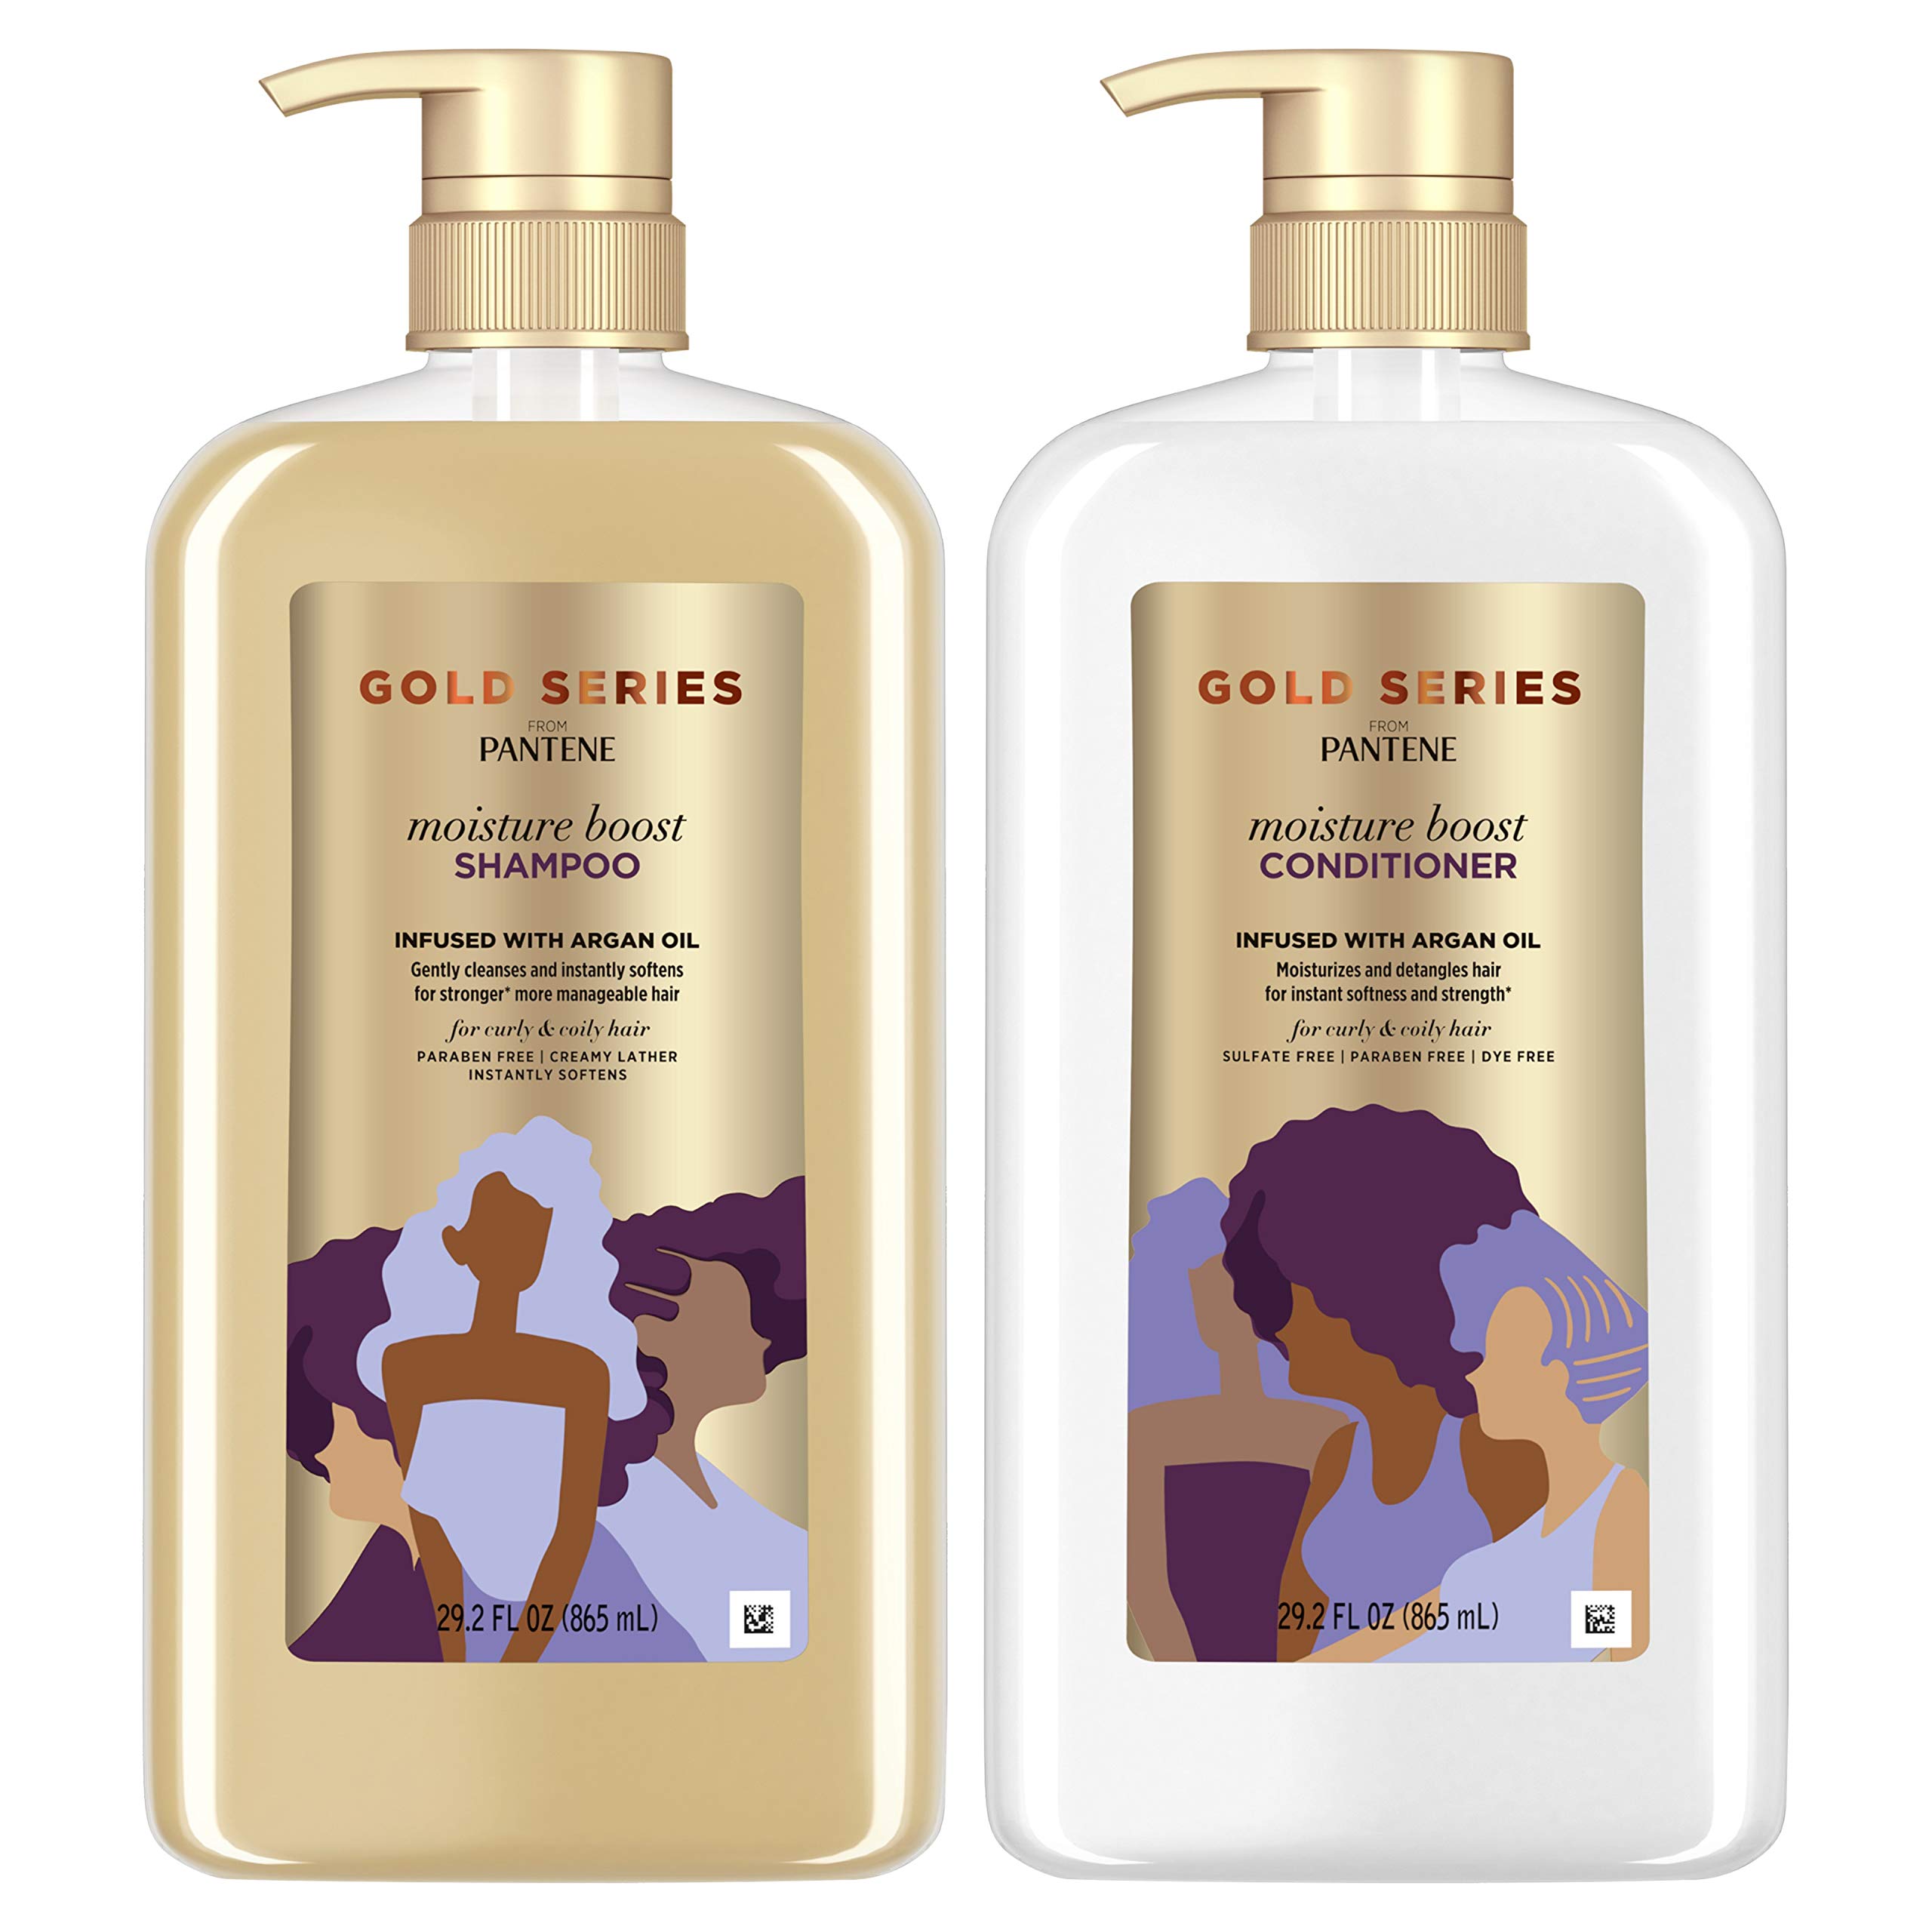 Gold Series Shampoo & Conditioner Moisture Boost with Argan Oil, for Natural, Coily, and Curly